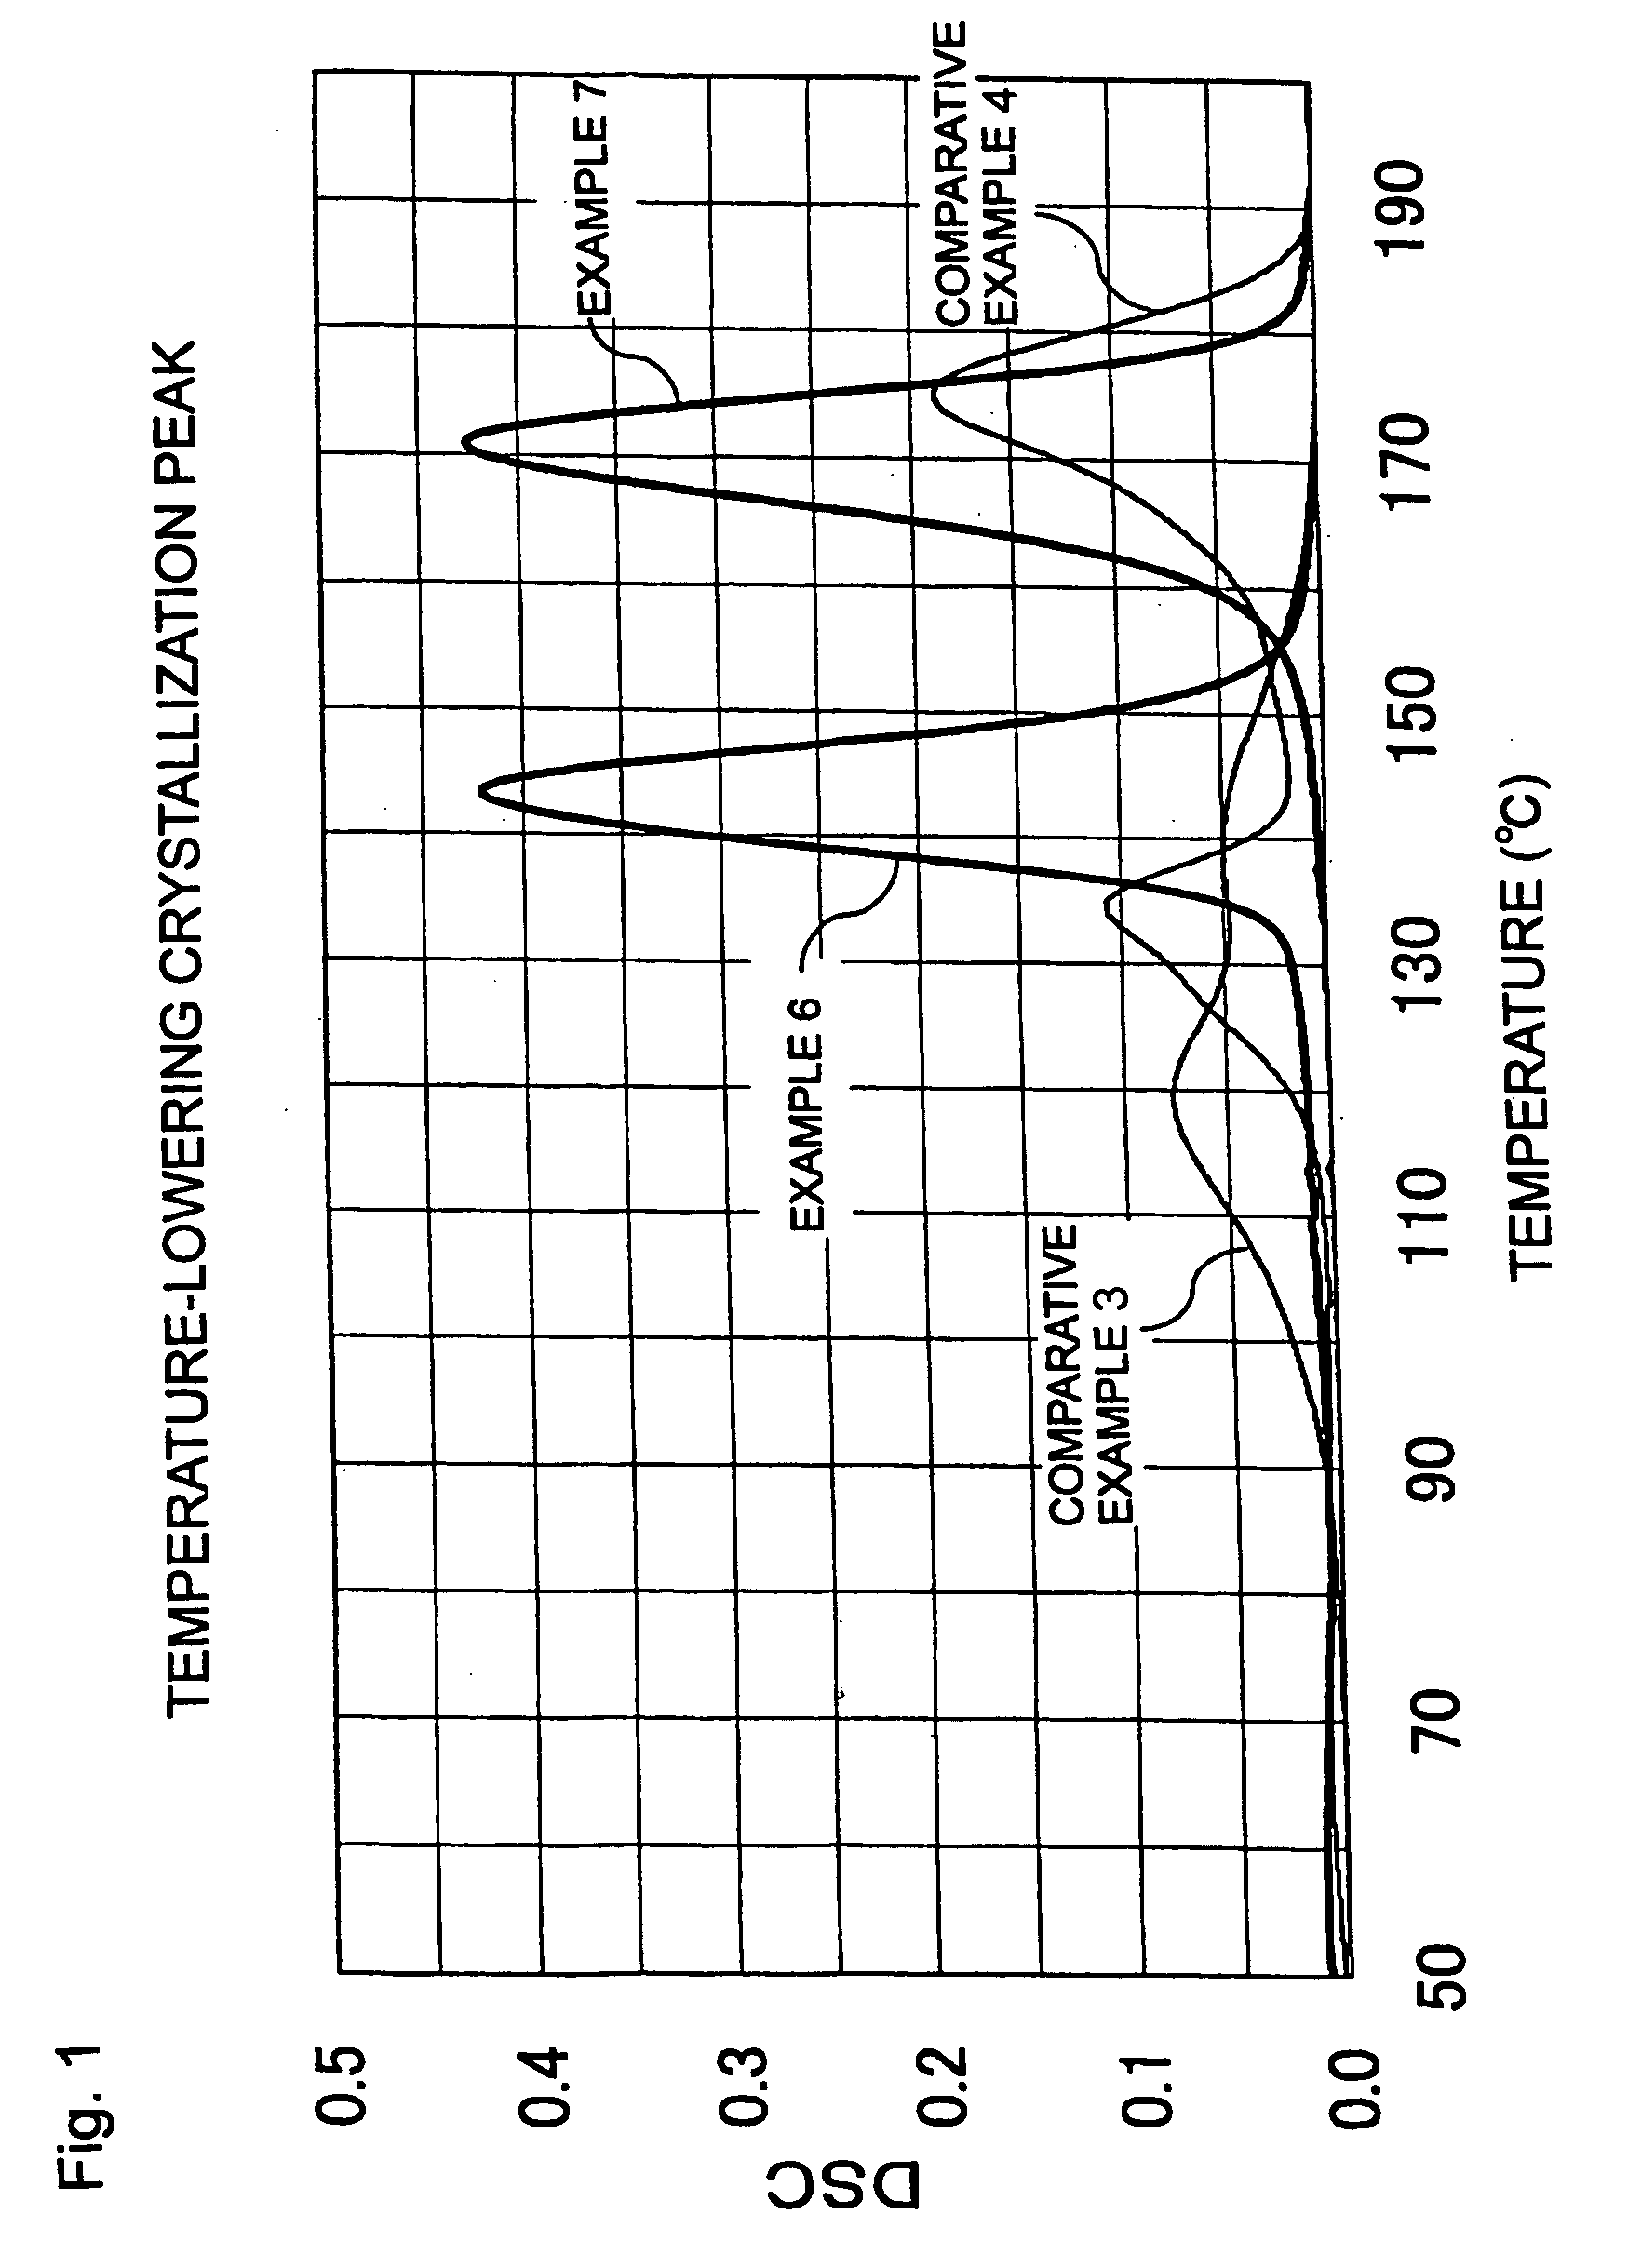 Polylactic acid-based resin compositions, molded articles and process for producing the same